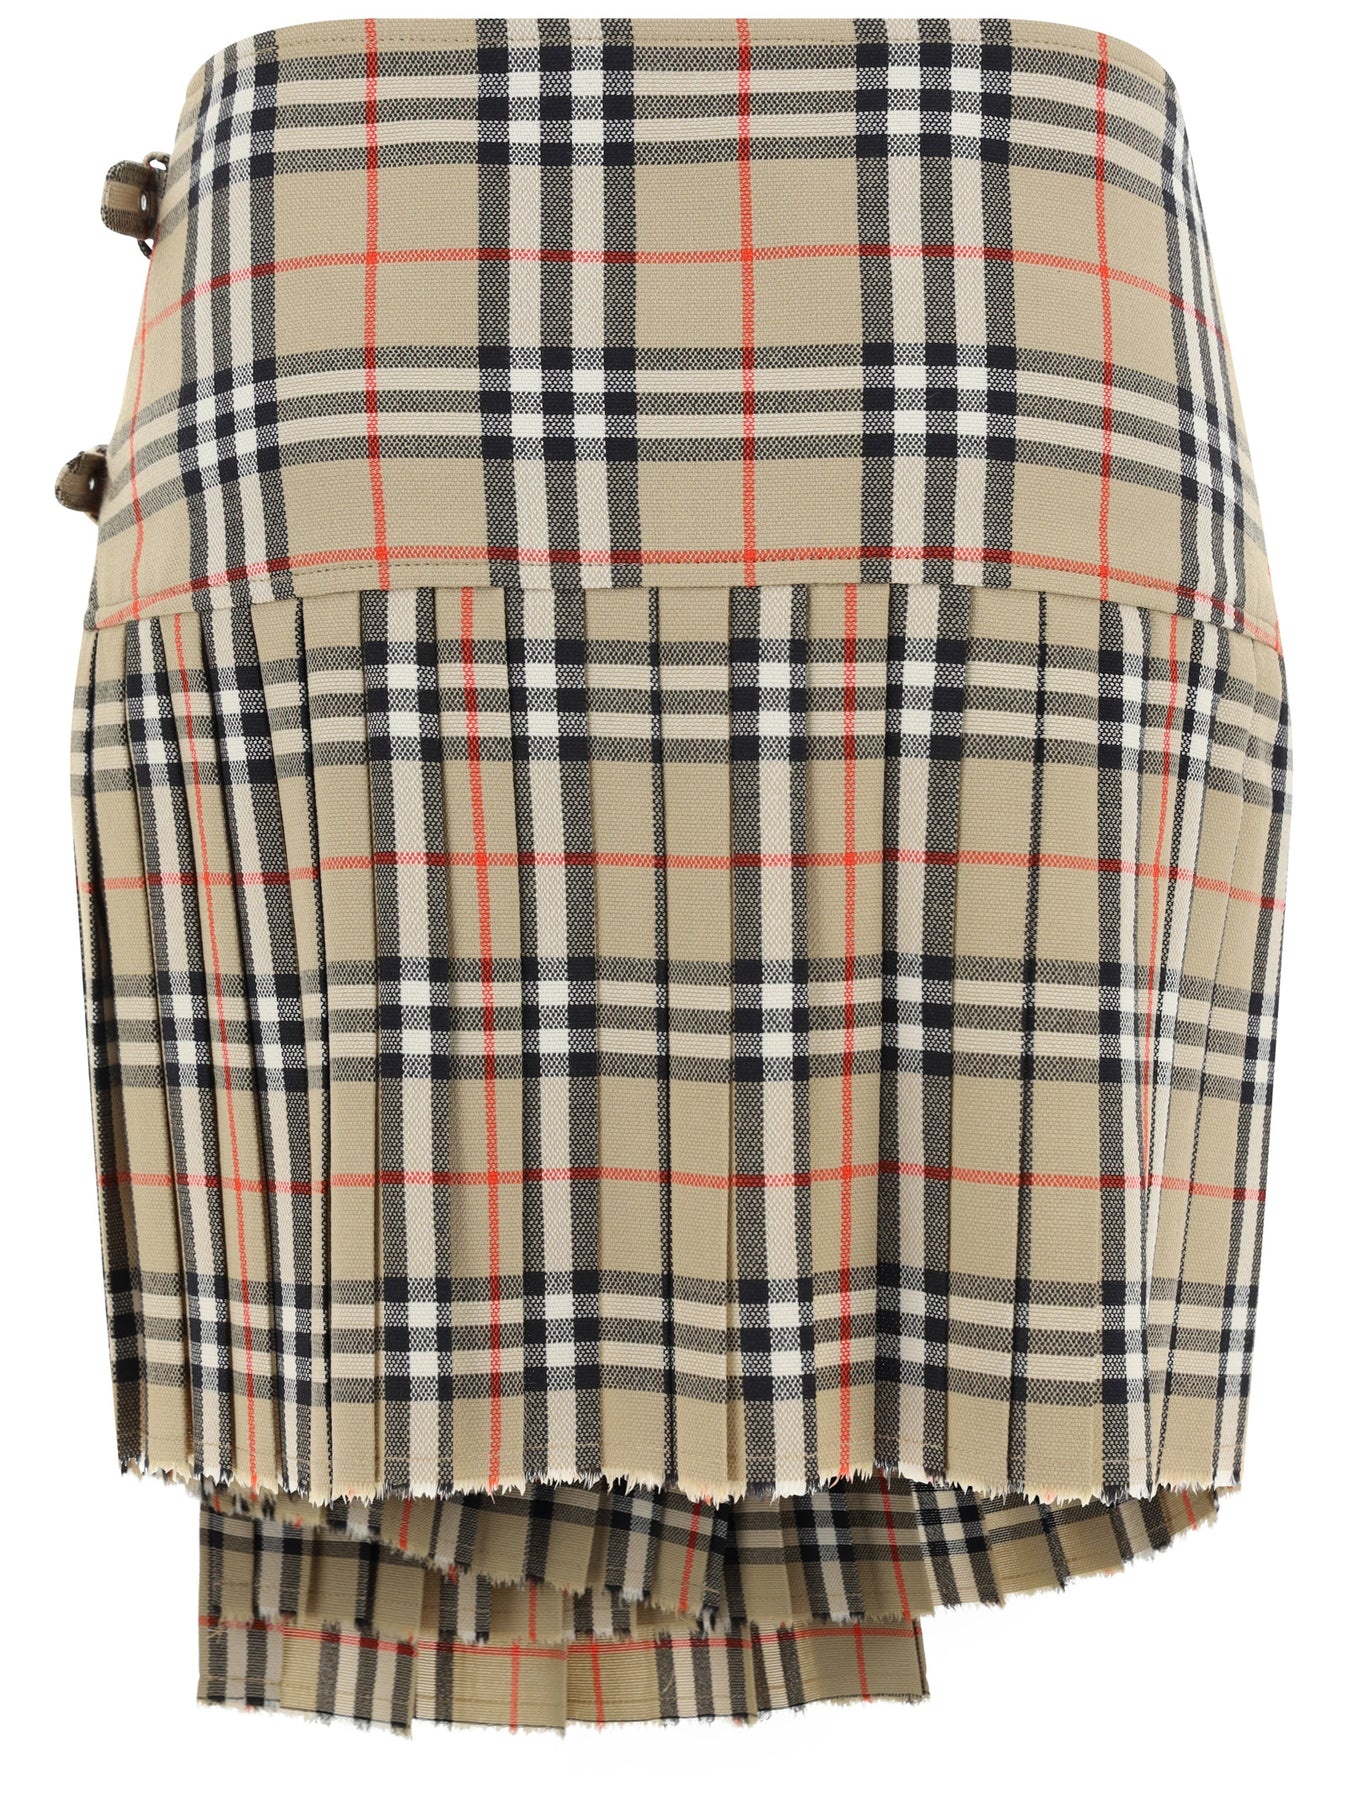 Wool skirt with iconic print - 2